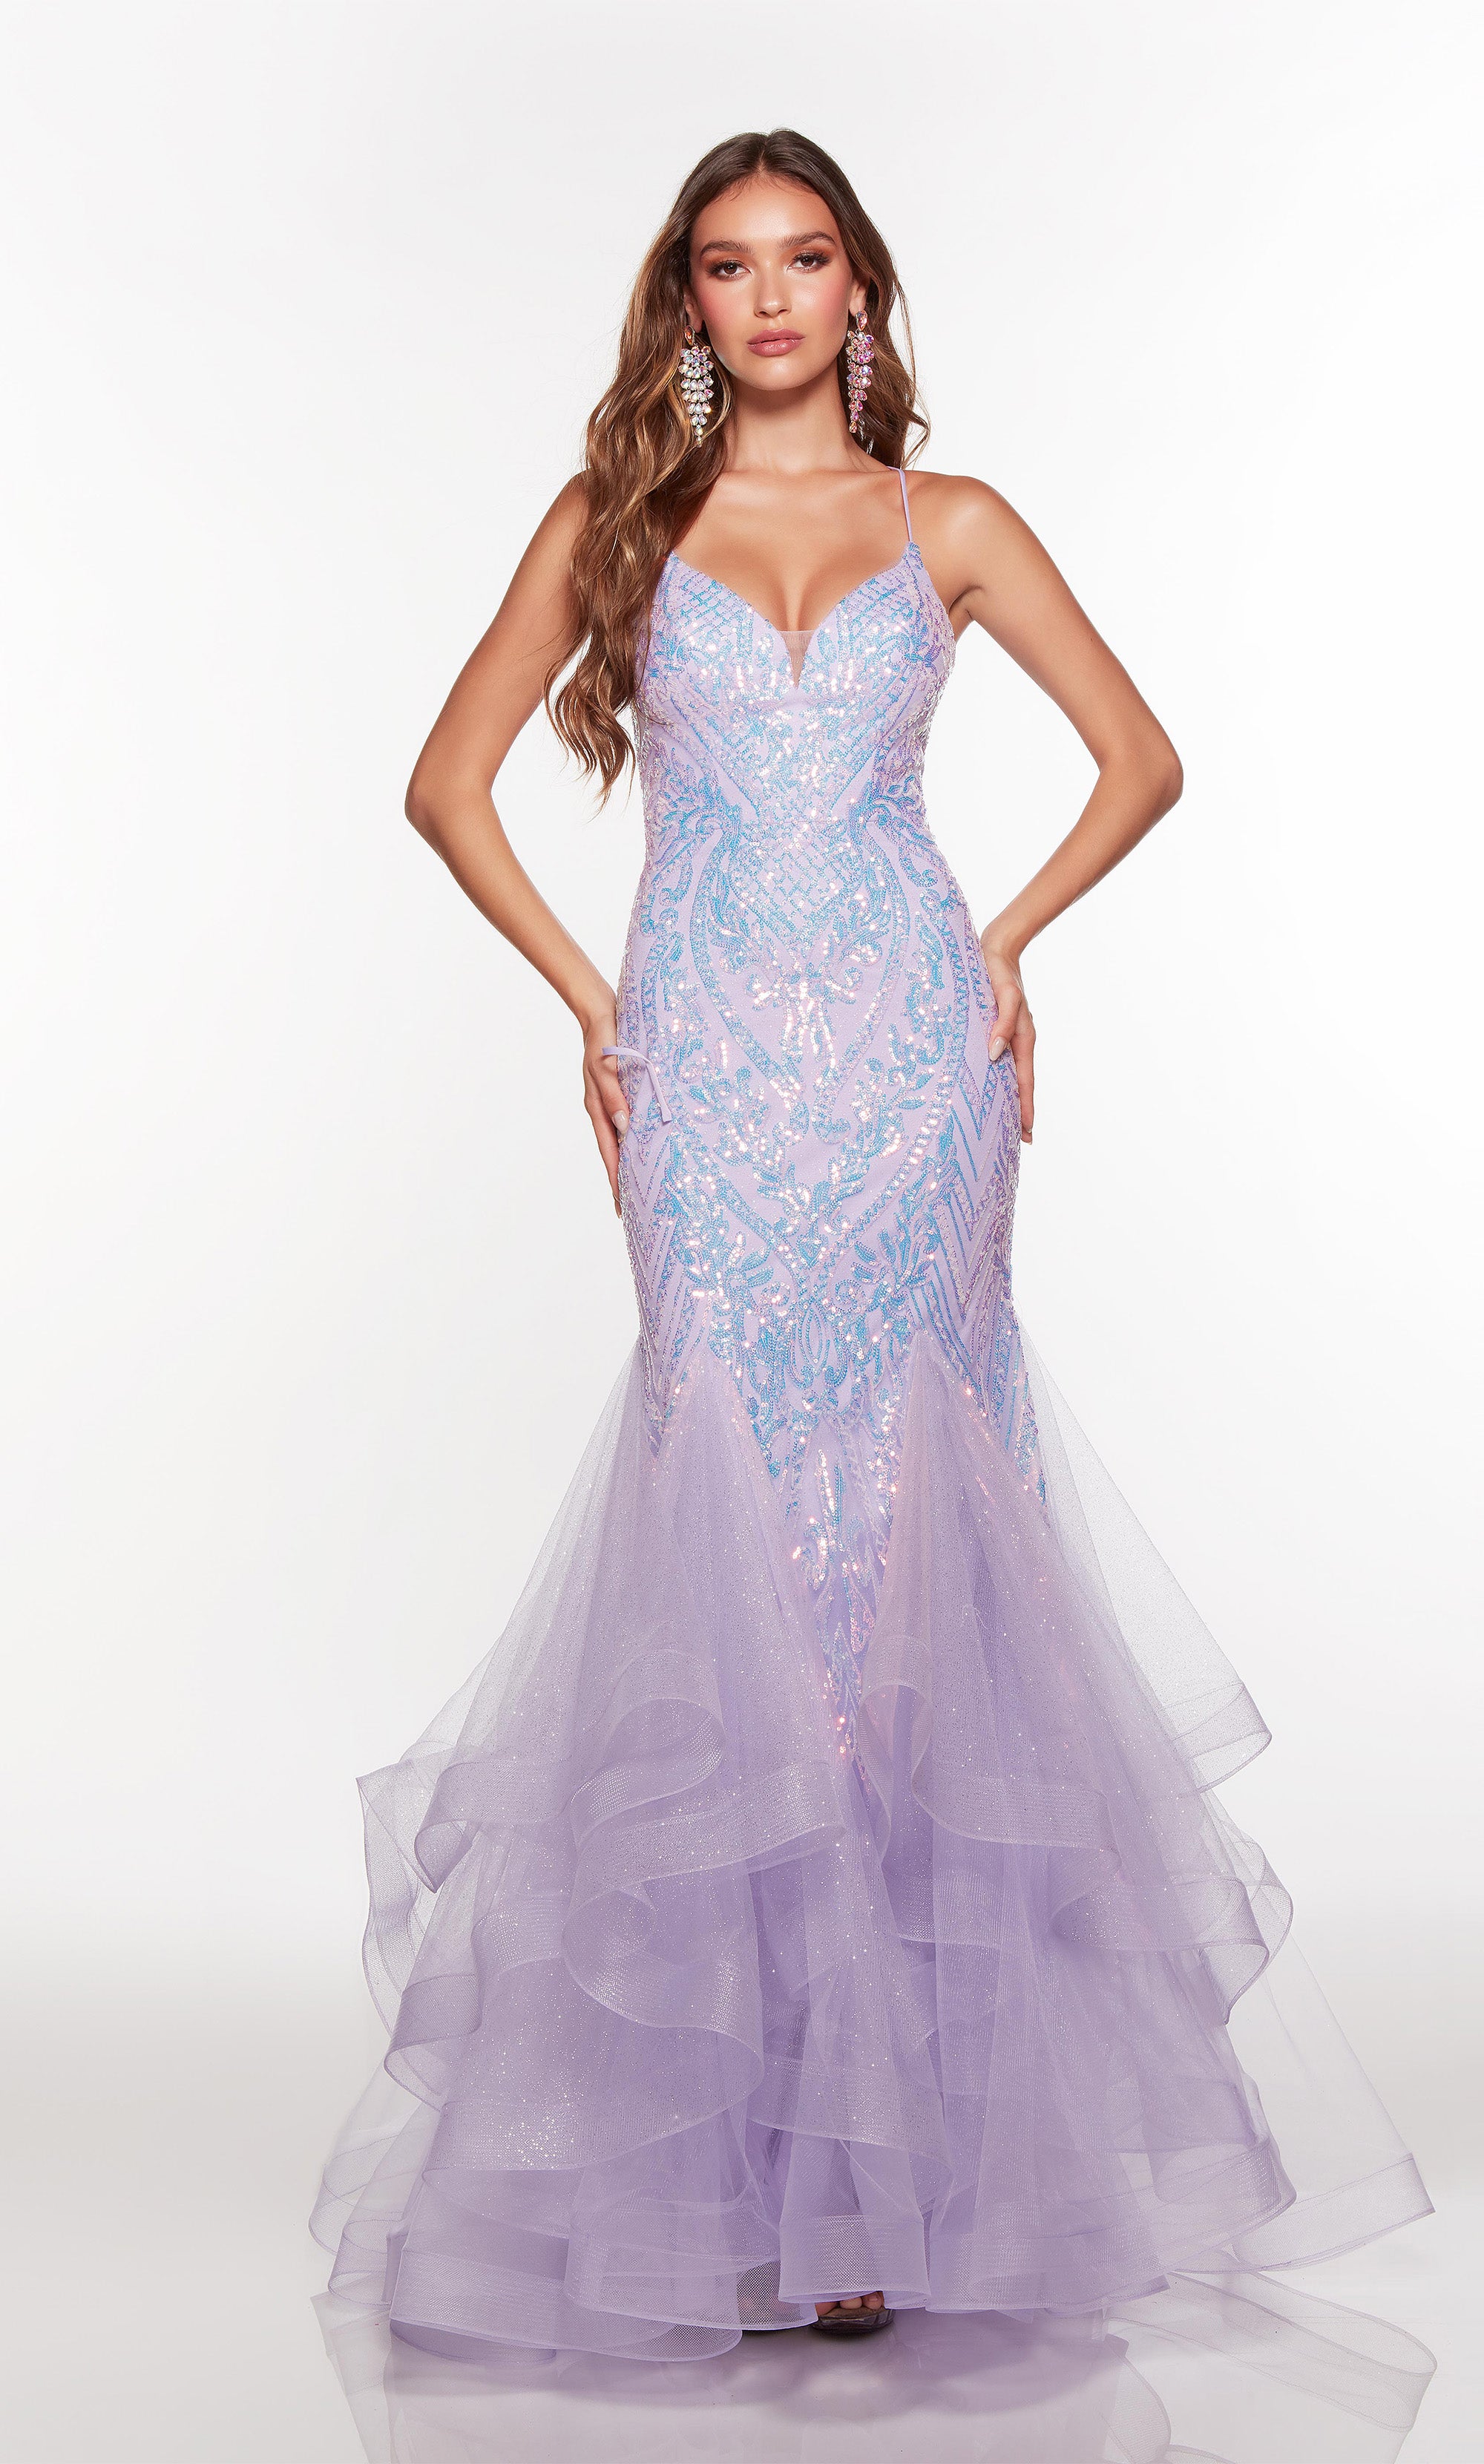 Strapless Long Ice Blue Ombre Sequin Prom Dress